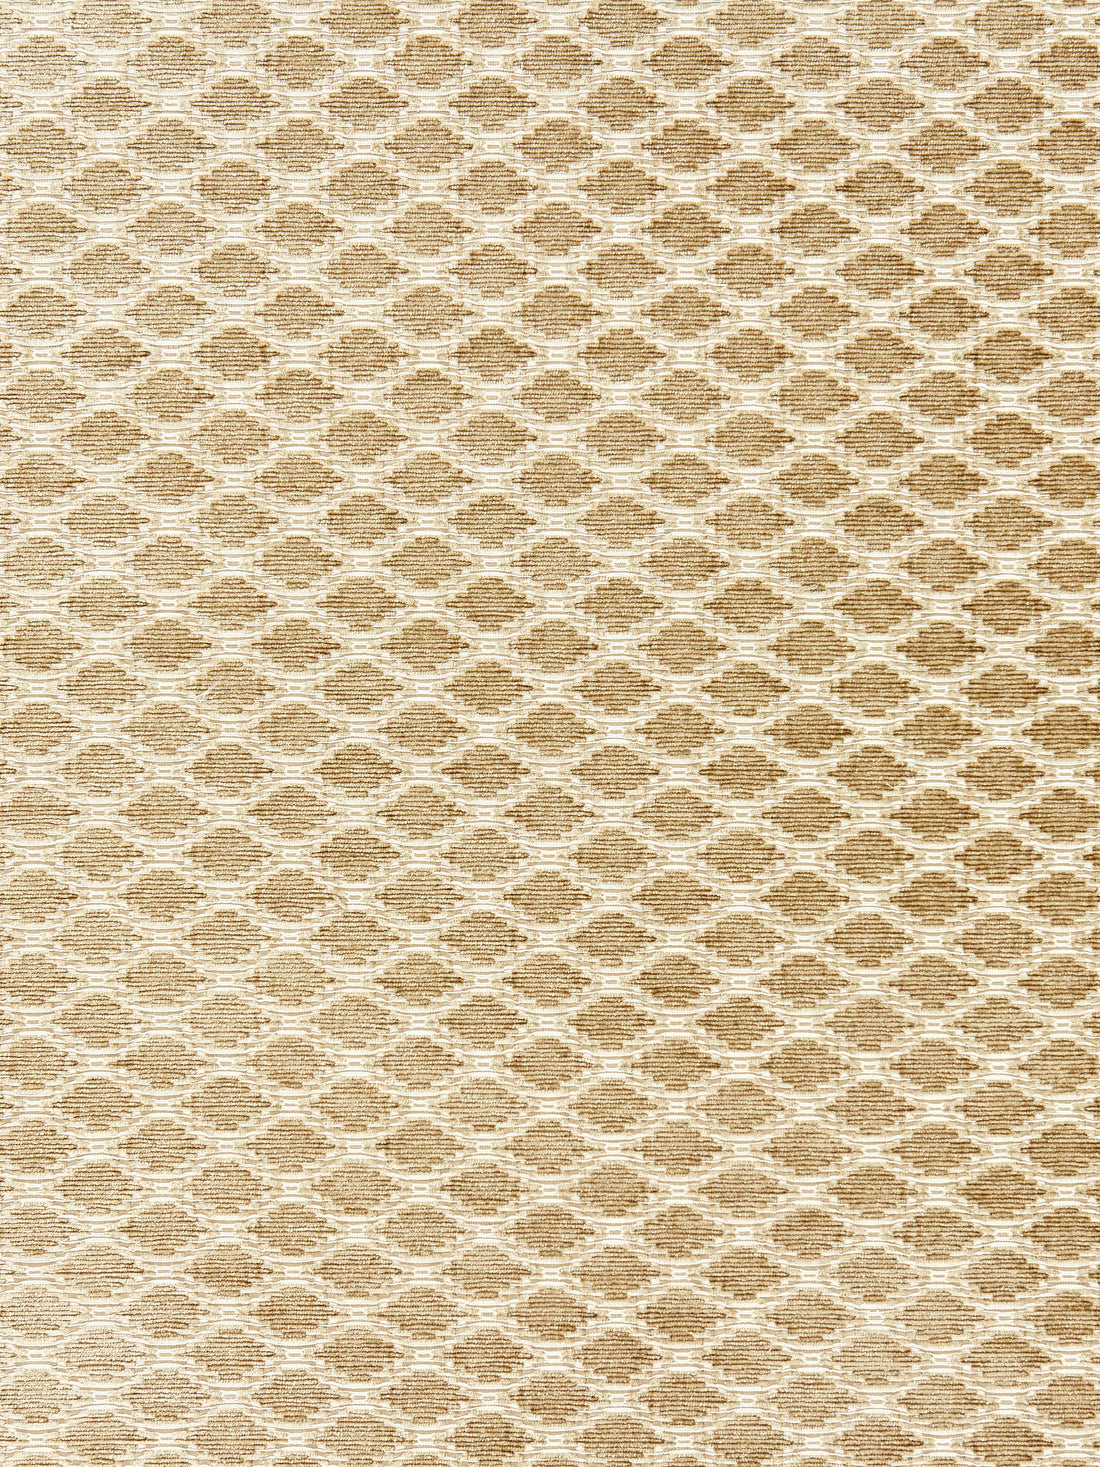 Tristan Weave fabric in latte color - pattern number SC 000327101 - by Scalamandre in the Scalamandre Fabrics Book 1 collection